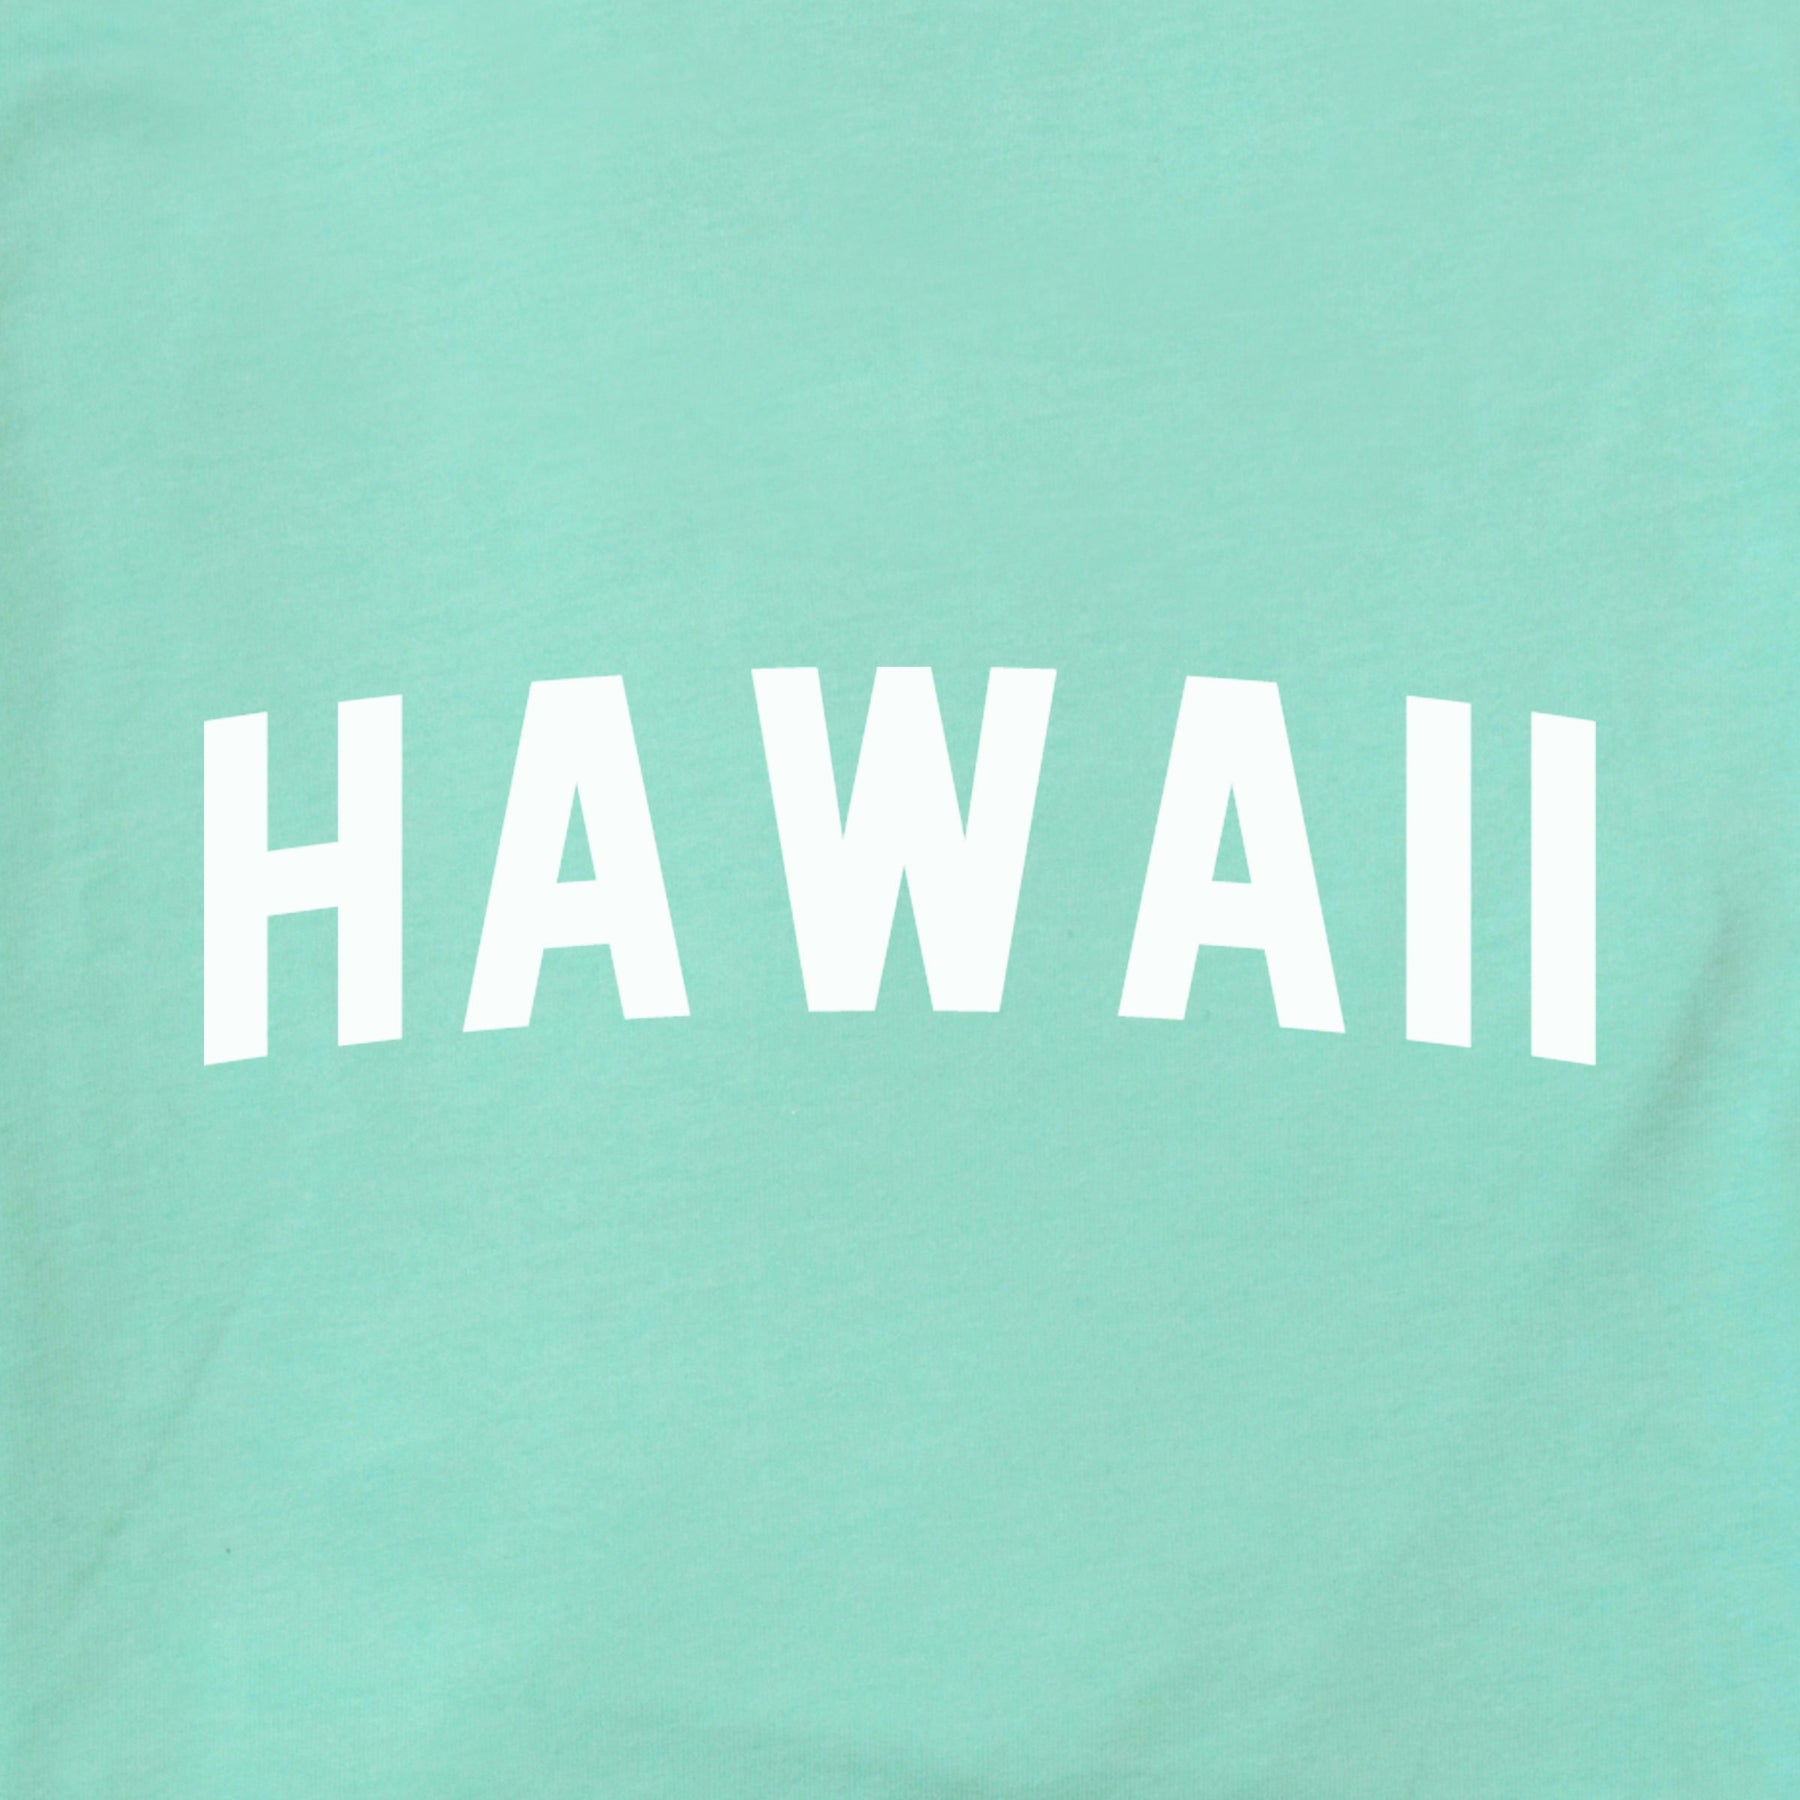 Hawaii Arched The Home T